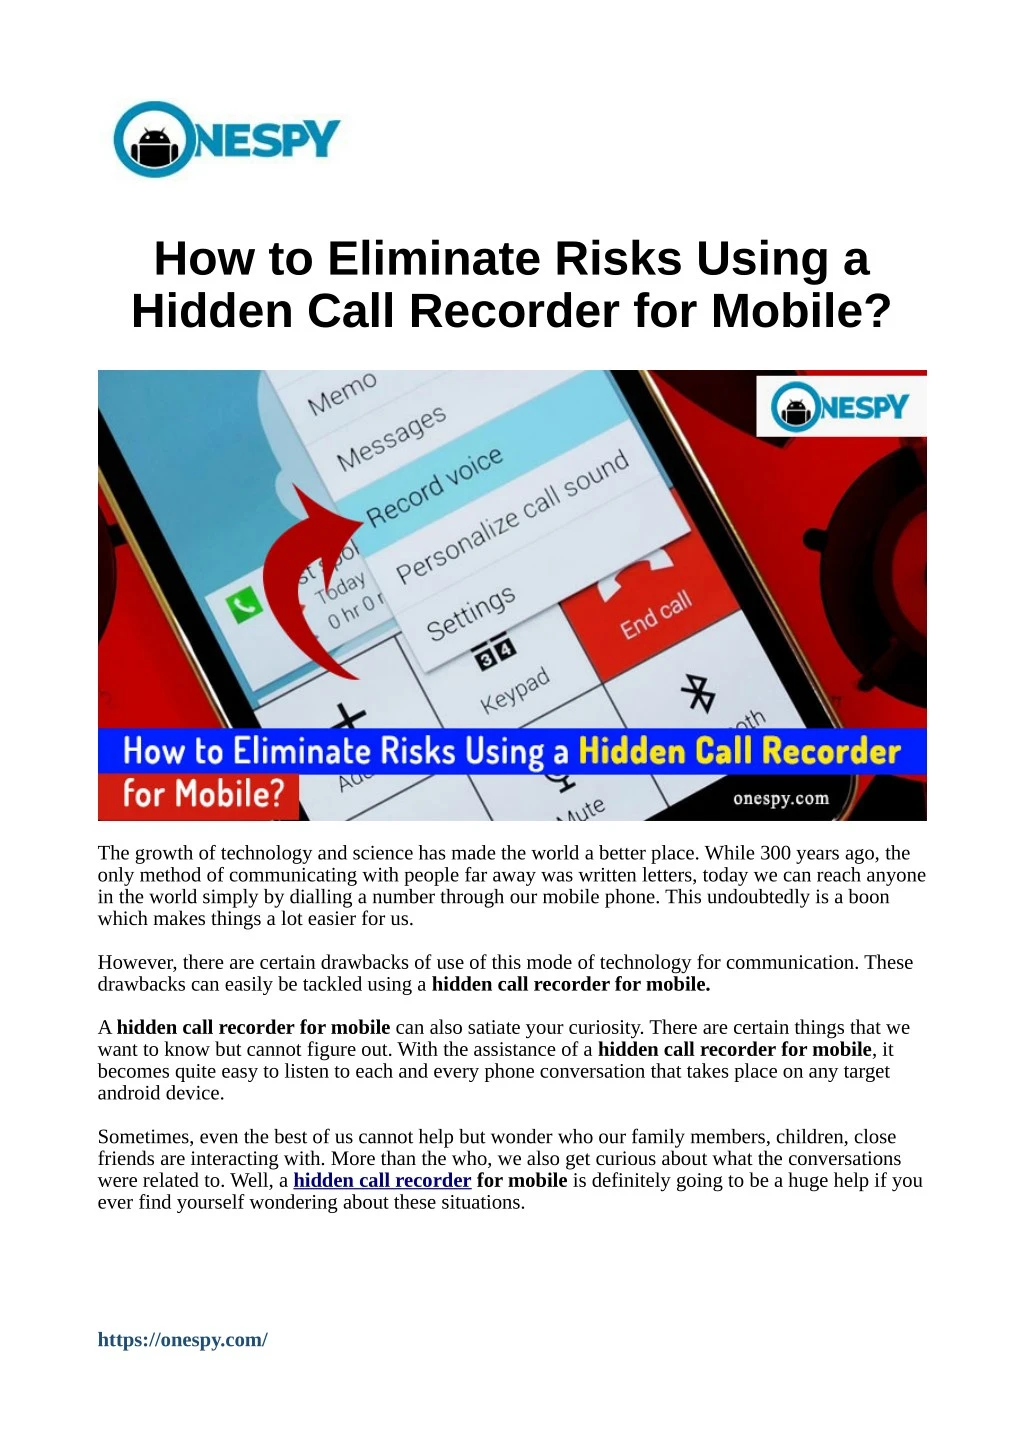 how to eliminate risks using a hidden call